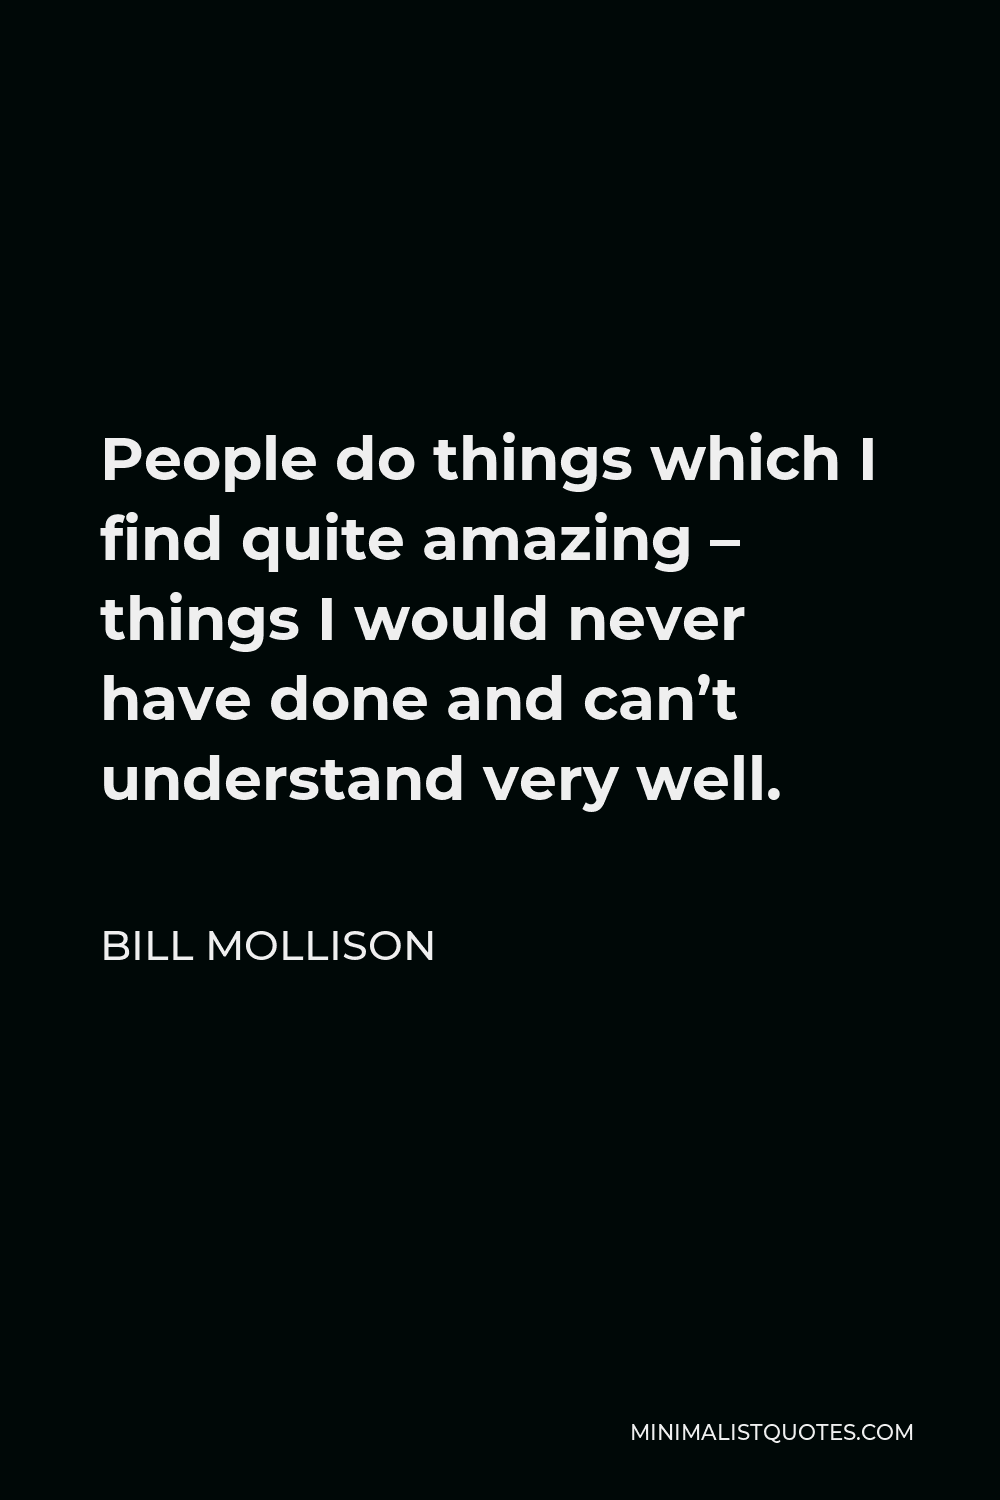 Bill Mollison Quote - People do things which I find quite amazing – things I would never have done and can’t understand very well.